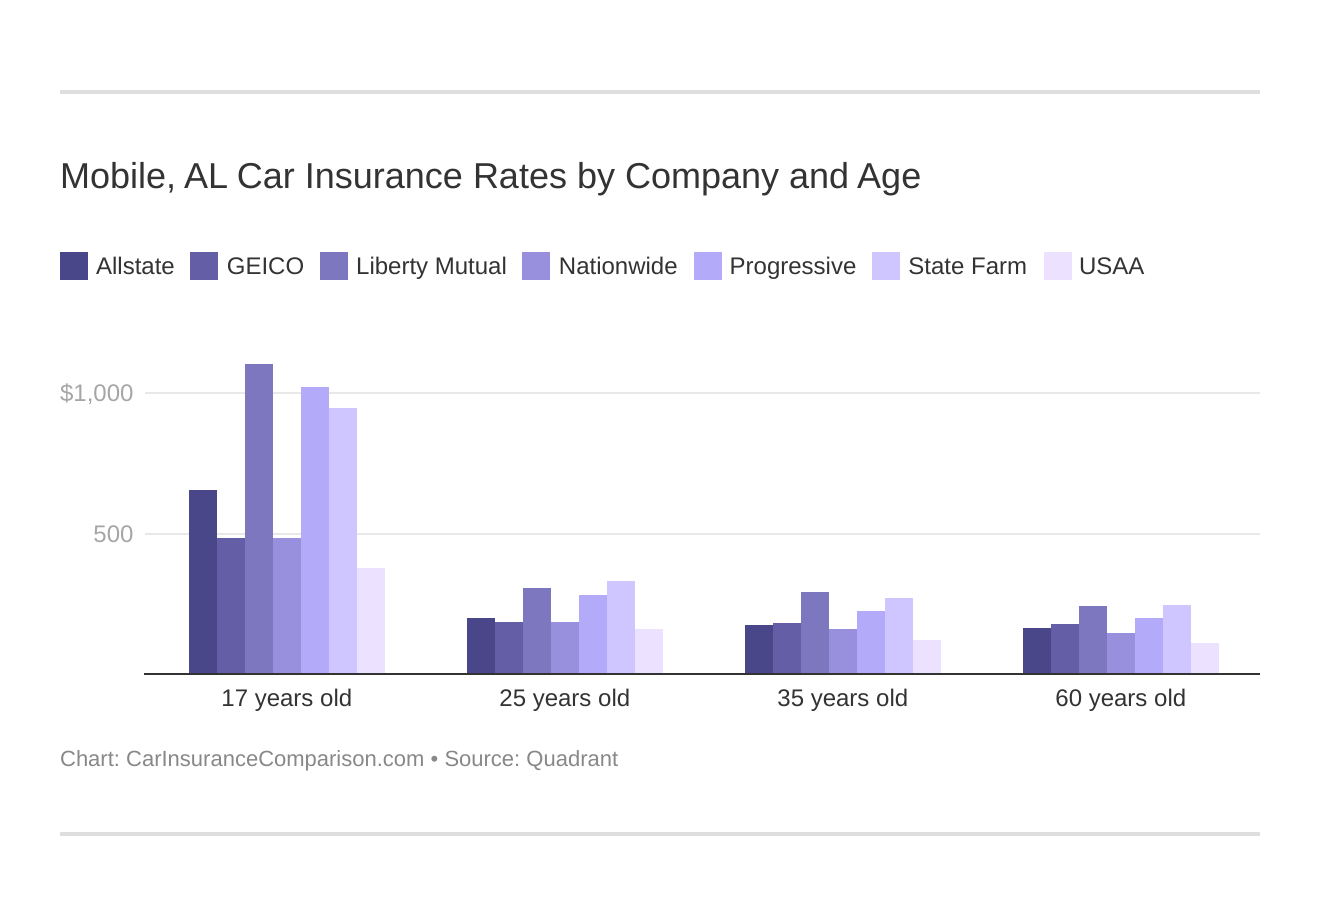 Mobile, AL Car Insurance Rates by Company and Age